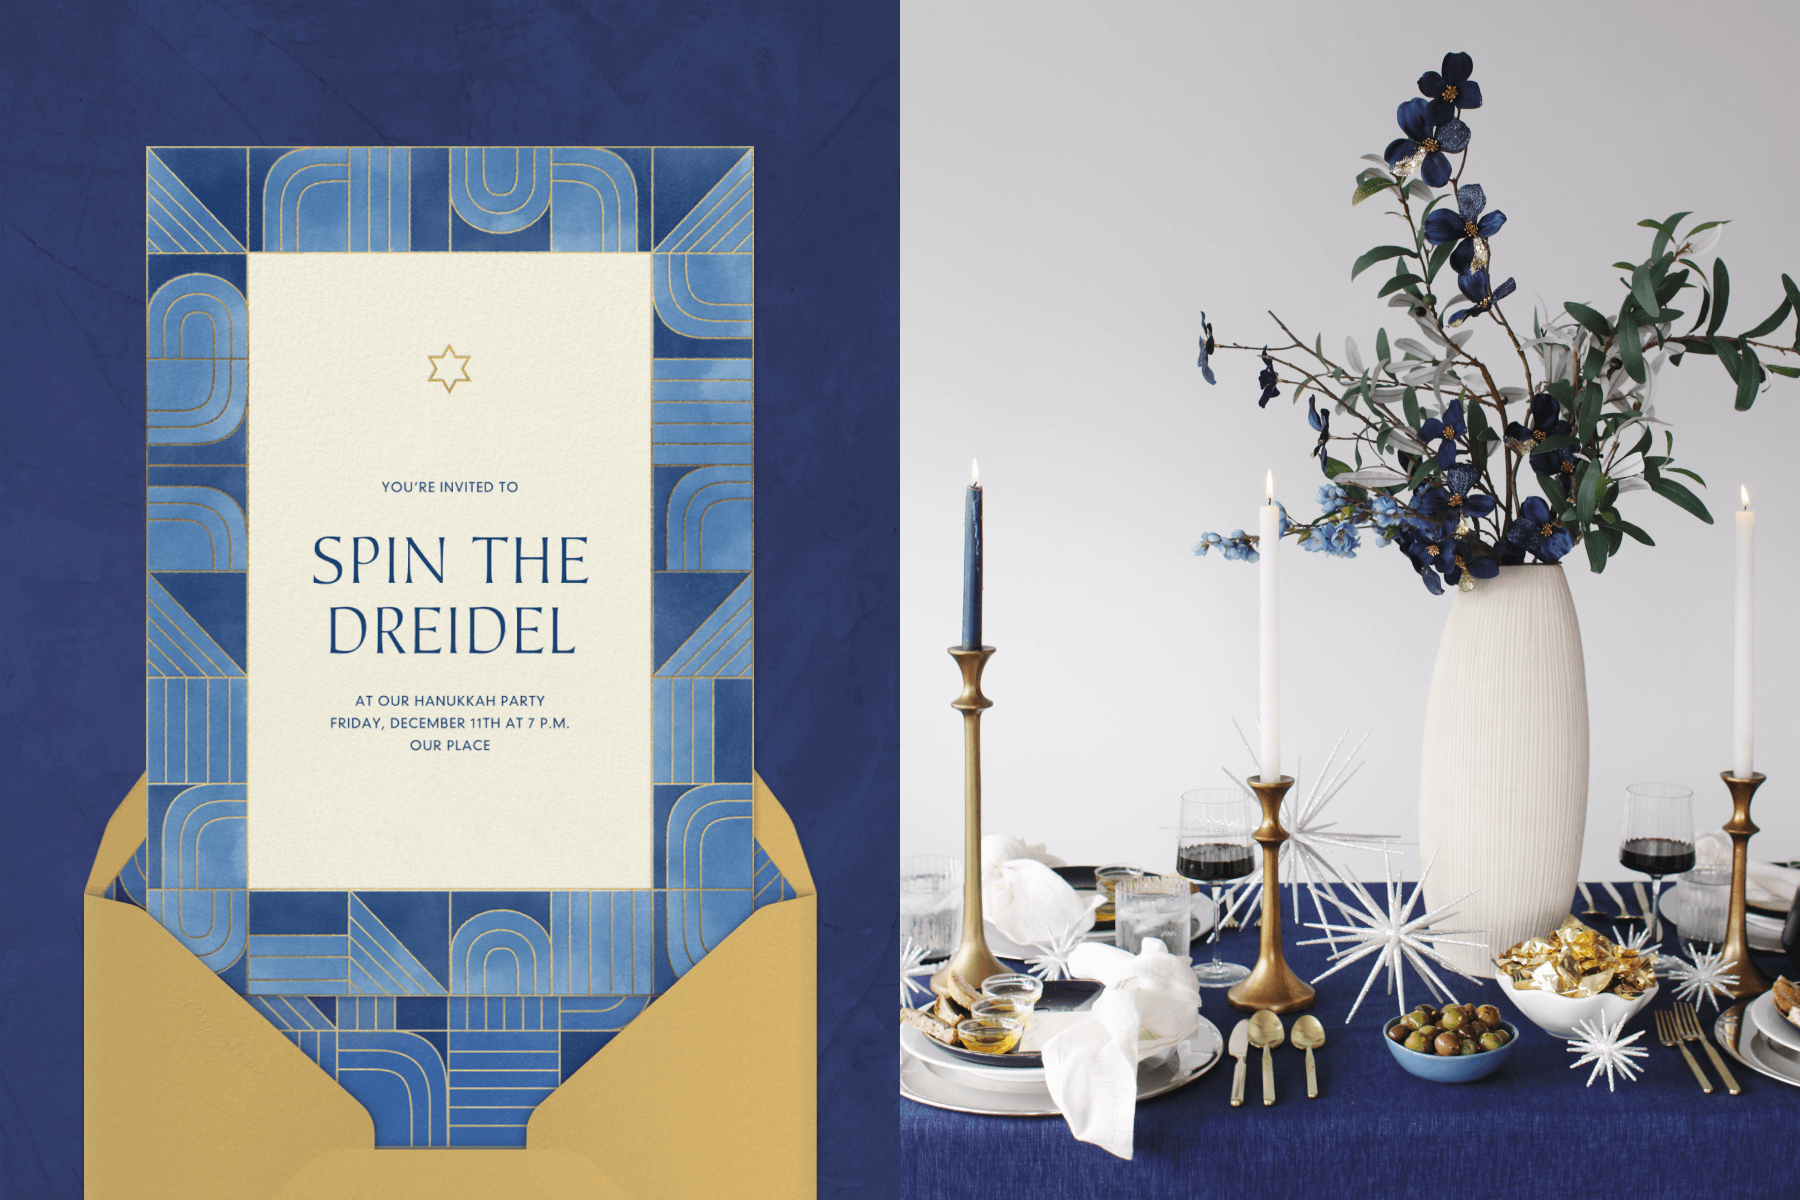 Left: A Hanukkah party invitation with a border of blue abstract shapes lined with gold and a small Jewish star in the center above a gold envelope. Right: On a navy tablecloth sits a white vase with blue flowers, blue and white taper candles in gold holders, and finger food.